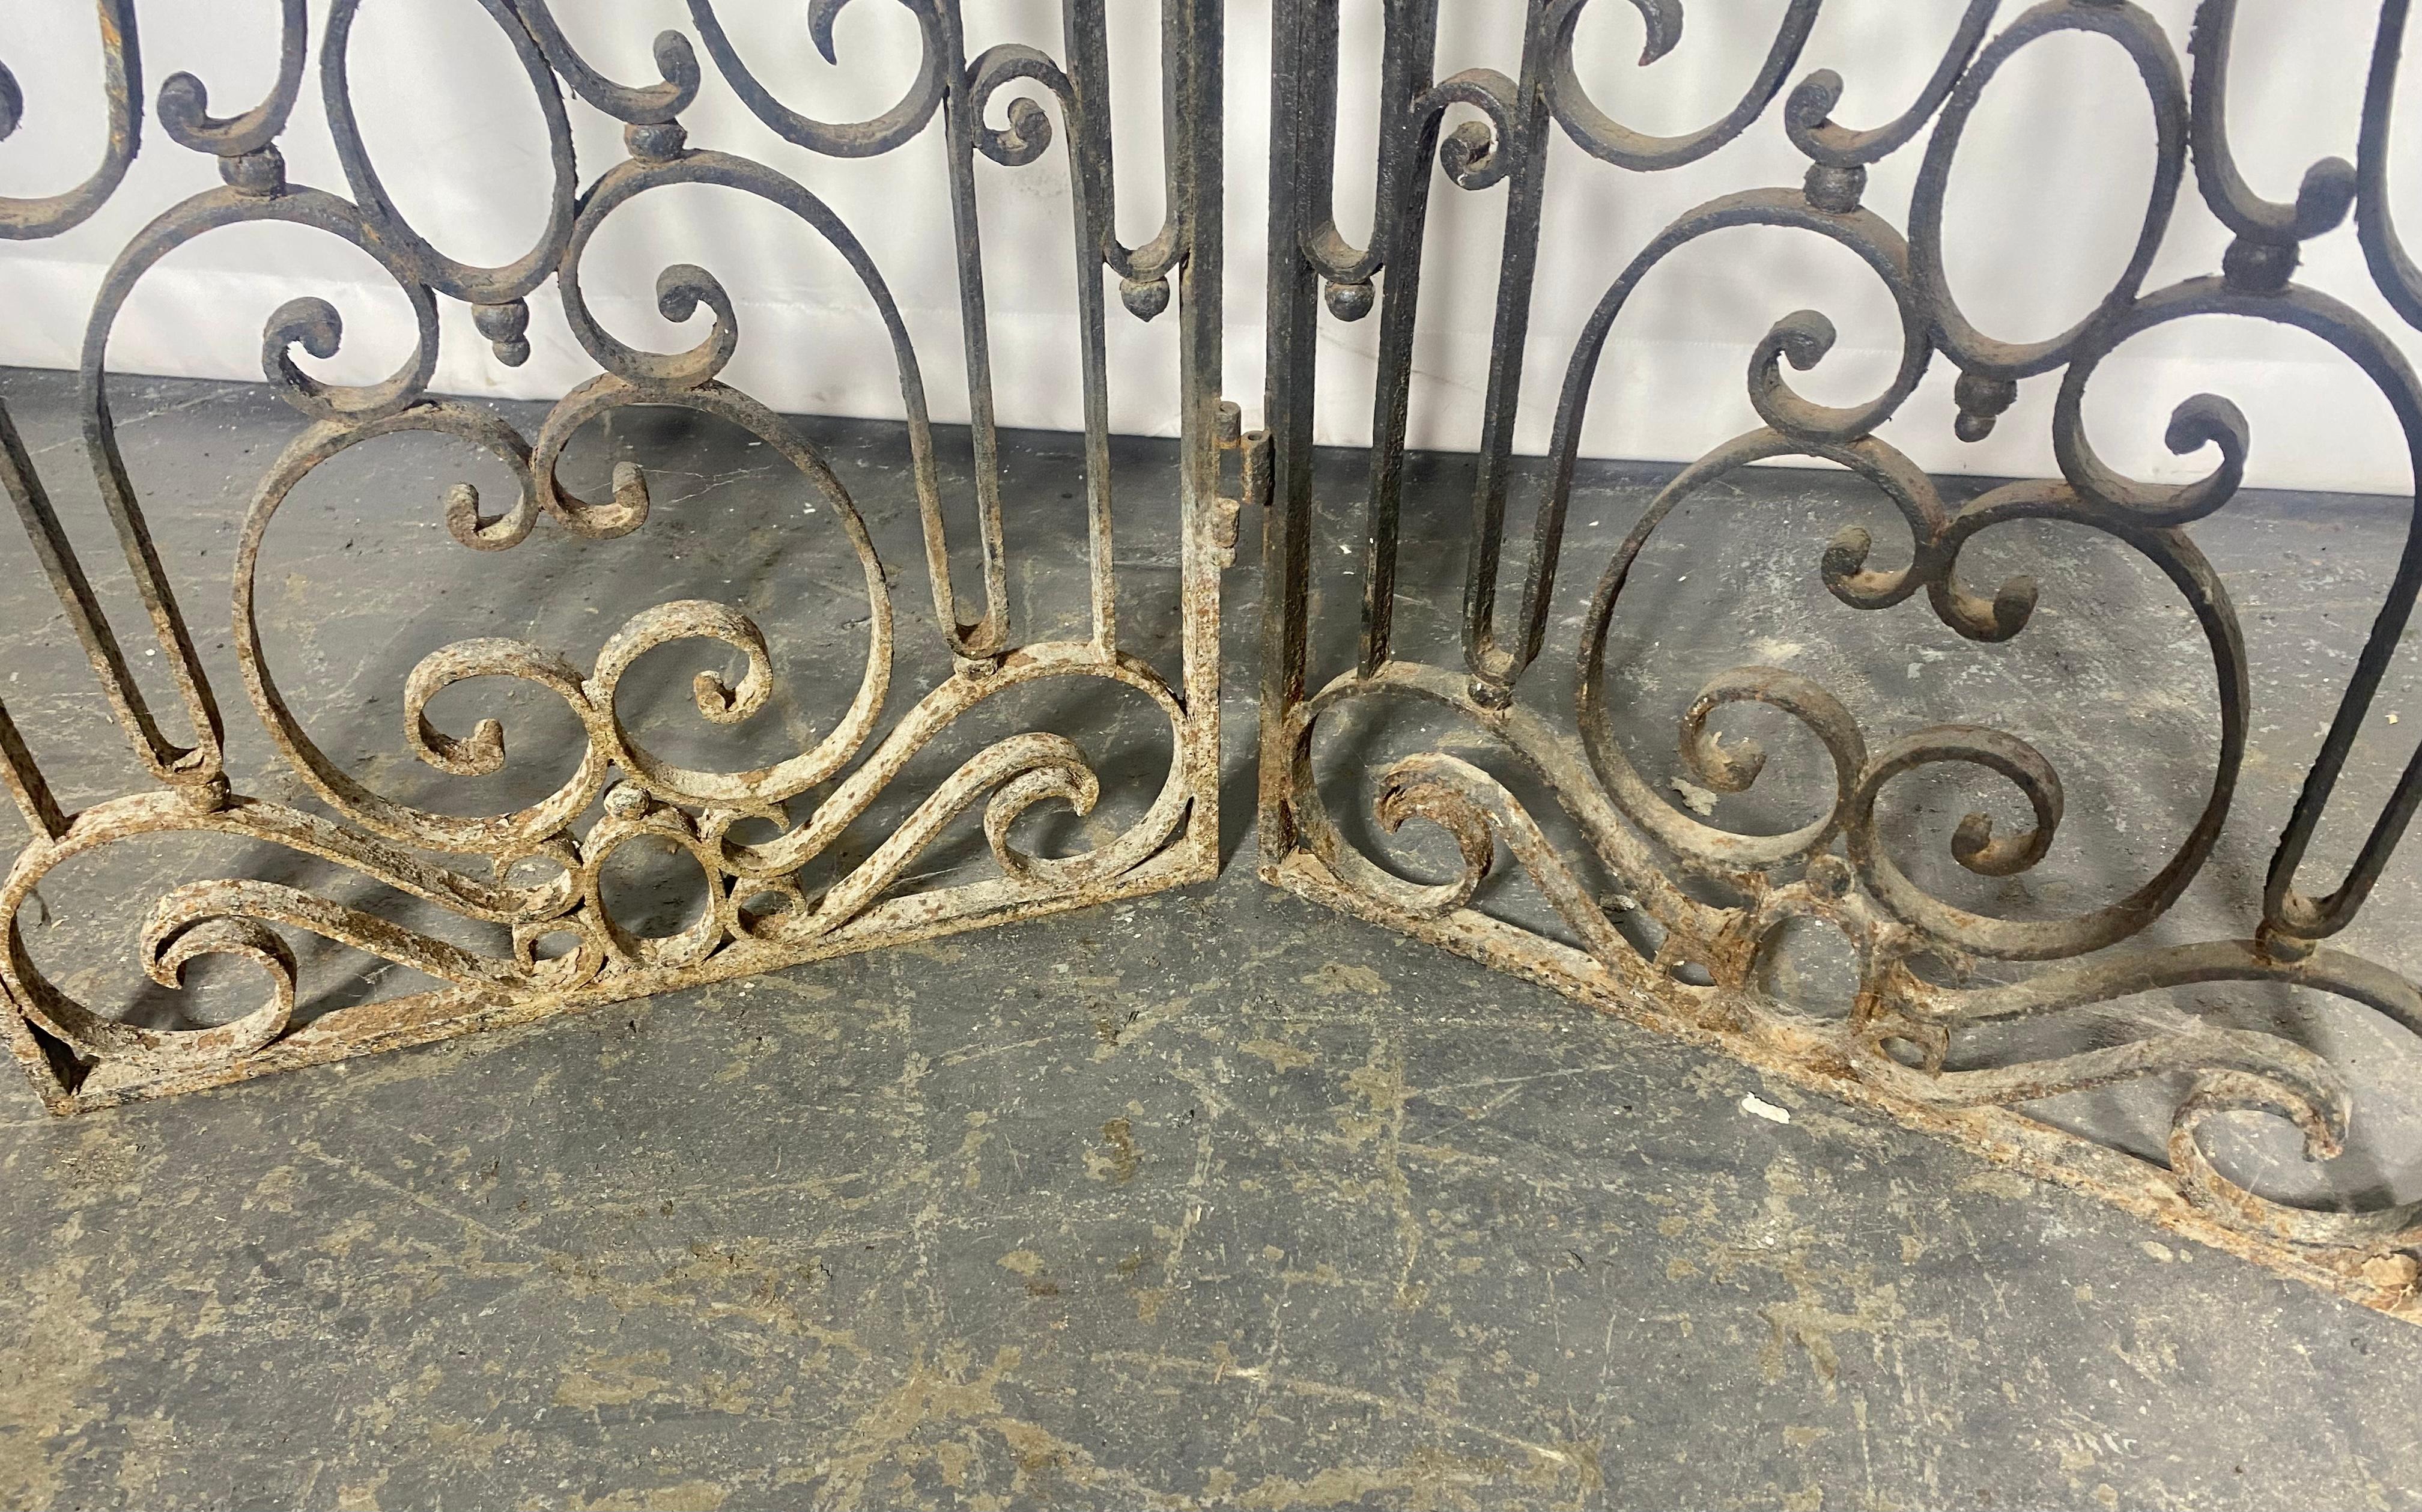 Lovely Hand Forged Wrought Iron Filigree Screen Room Divider, Garden element In Distressed Condition For Sale In Buffalo, NY